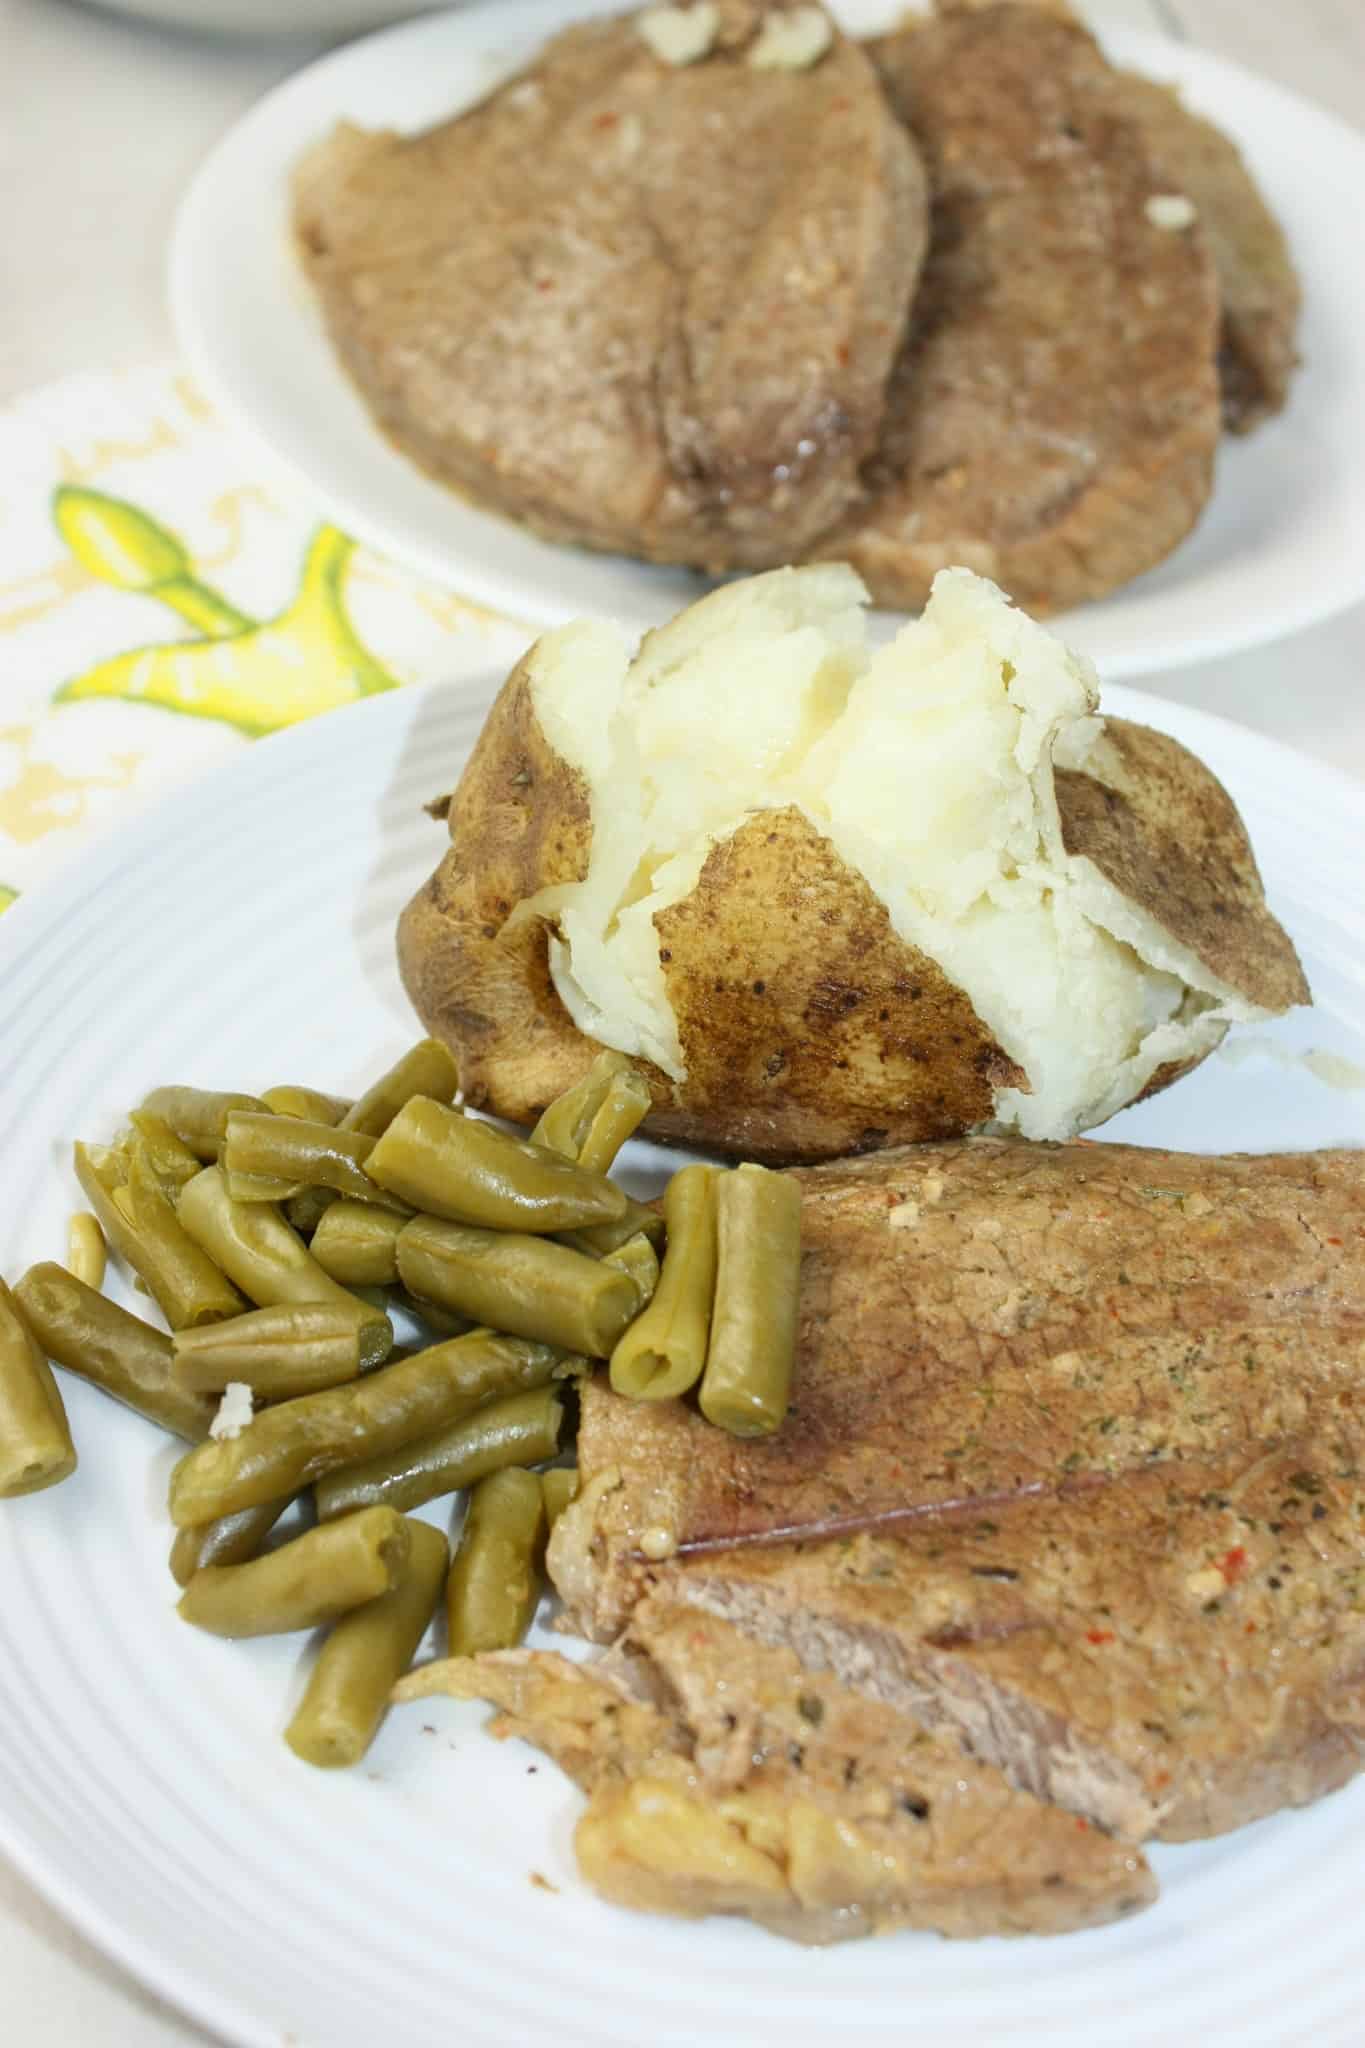 Instant Pot Steak and Potatoes is an easy pressure cooker recipe. This naturally gluten free dinner just needs the addition of your favourite side.